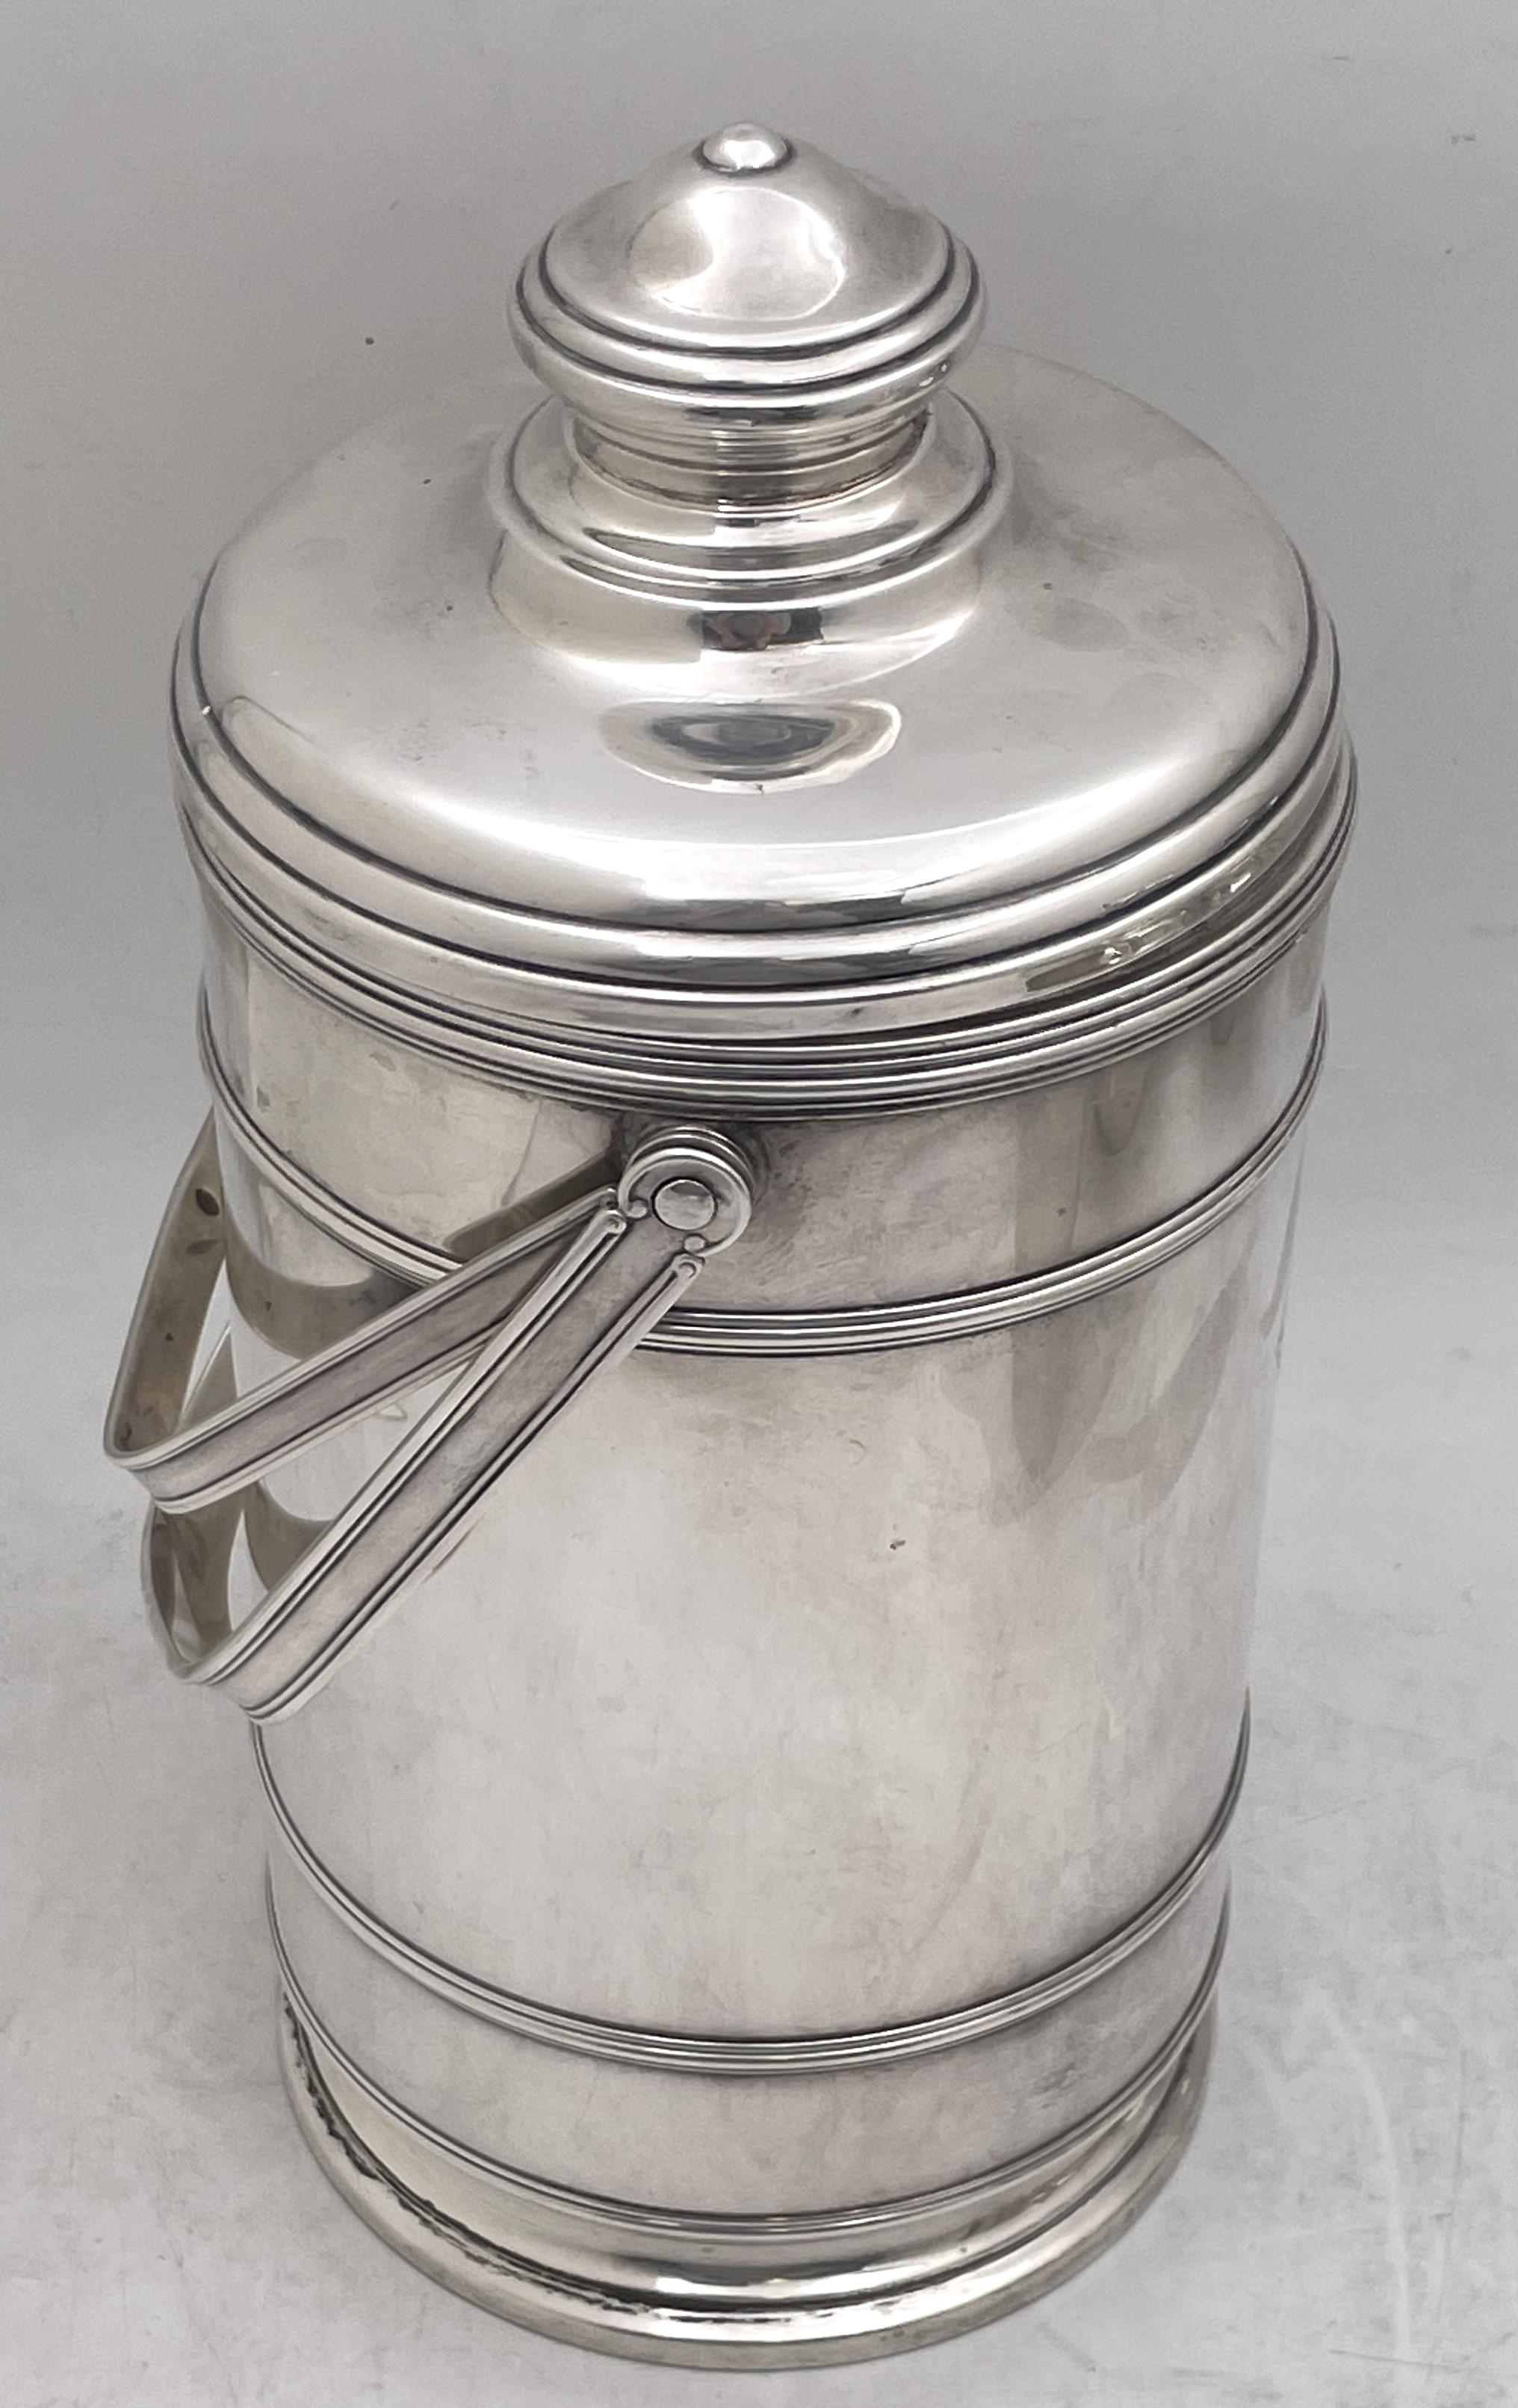 Lebkuecher (for Cartier/ Tiffany?) Sterling Silver Ice Bucket in Art Deco Style In Good Condition For Sale In New York, NY